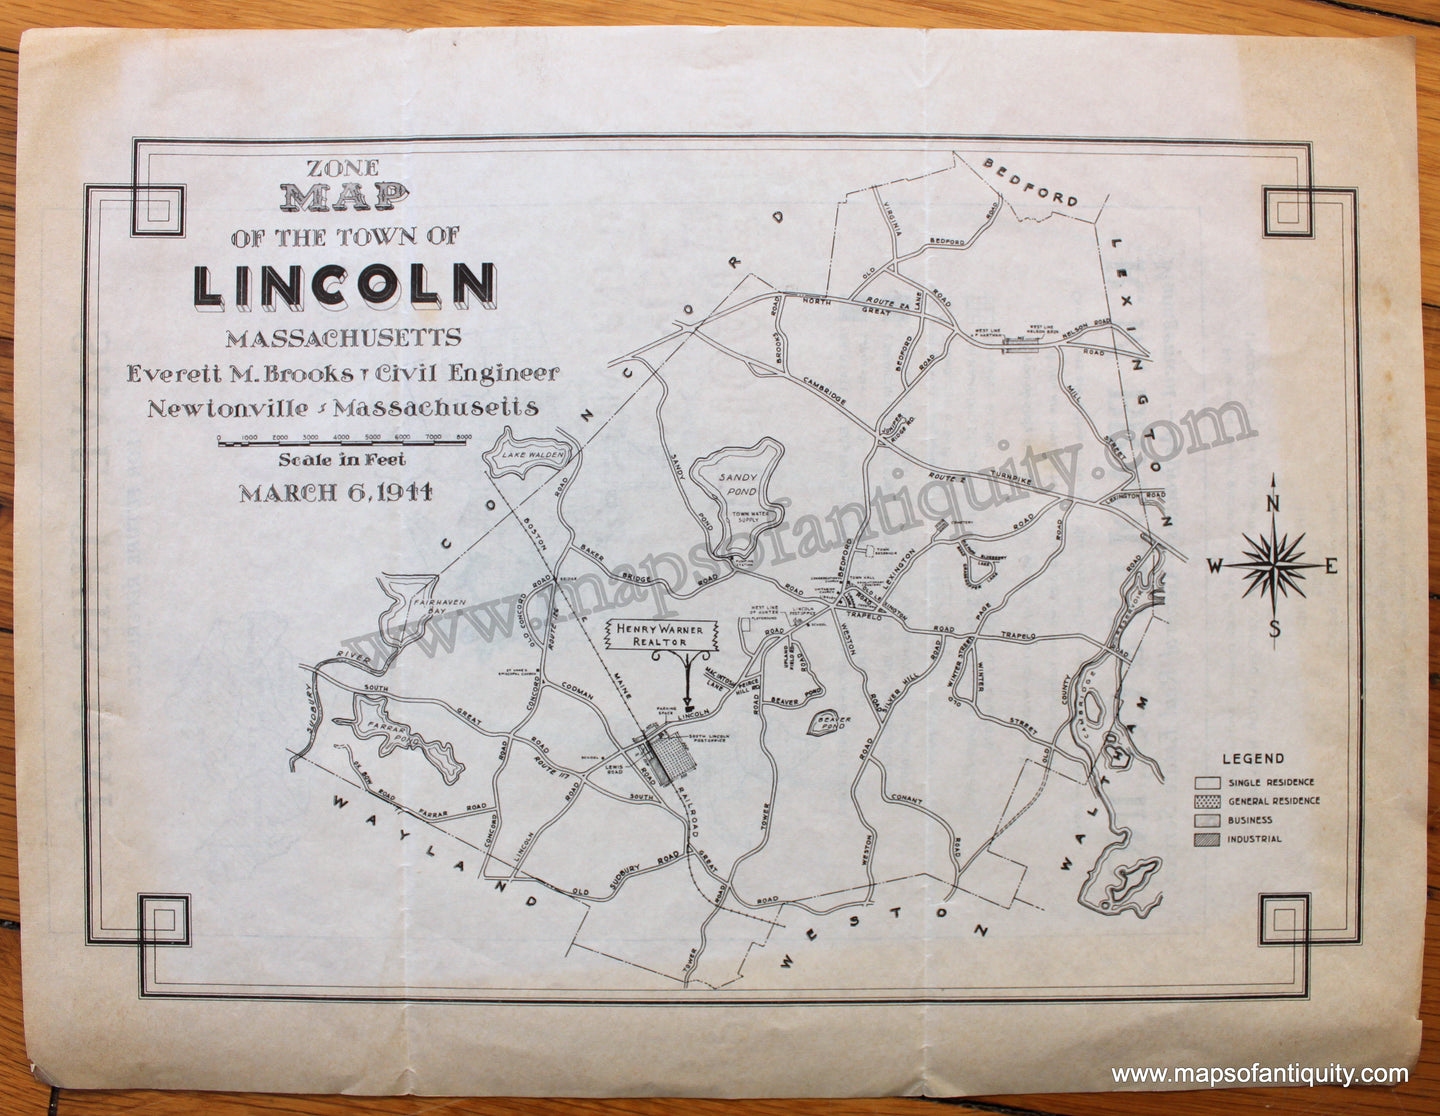 Antique-Uncolored-Map-Zone-Map-of-the-Town-of-Lincoln-Massachusetts-1944-Everett-M.-Brooks-Henry-Warner-1940s-1900s-20th-century-Maps-of-Antiquity